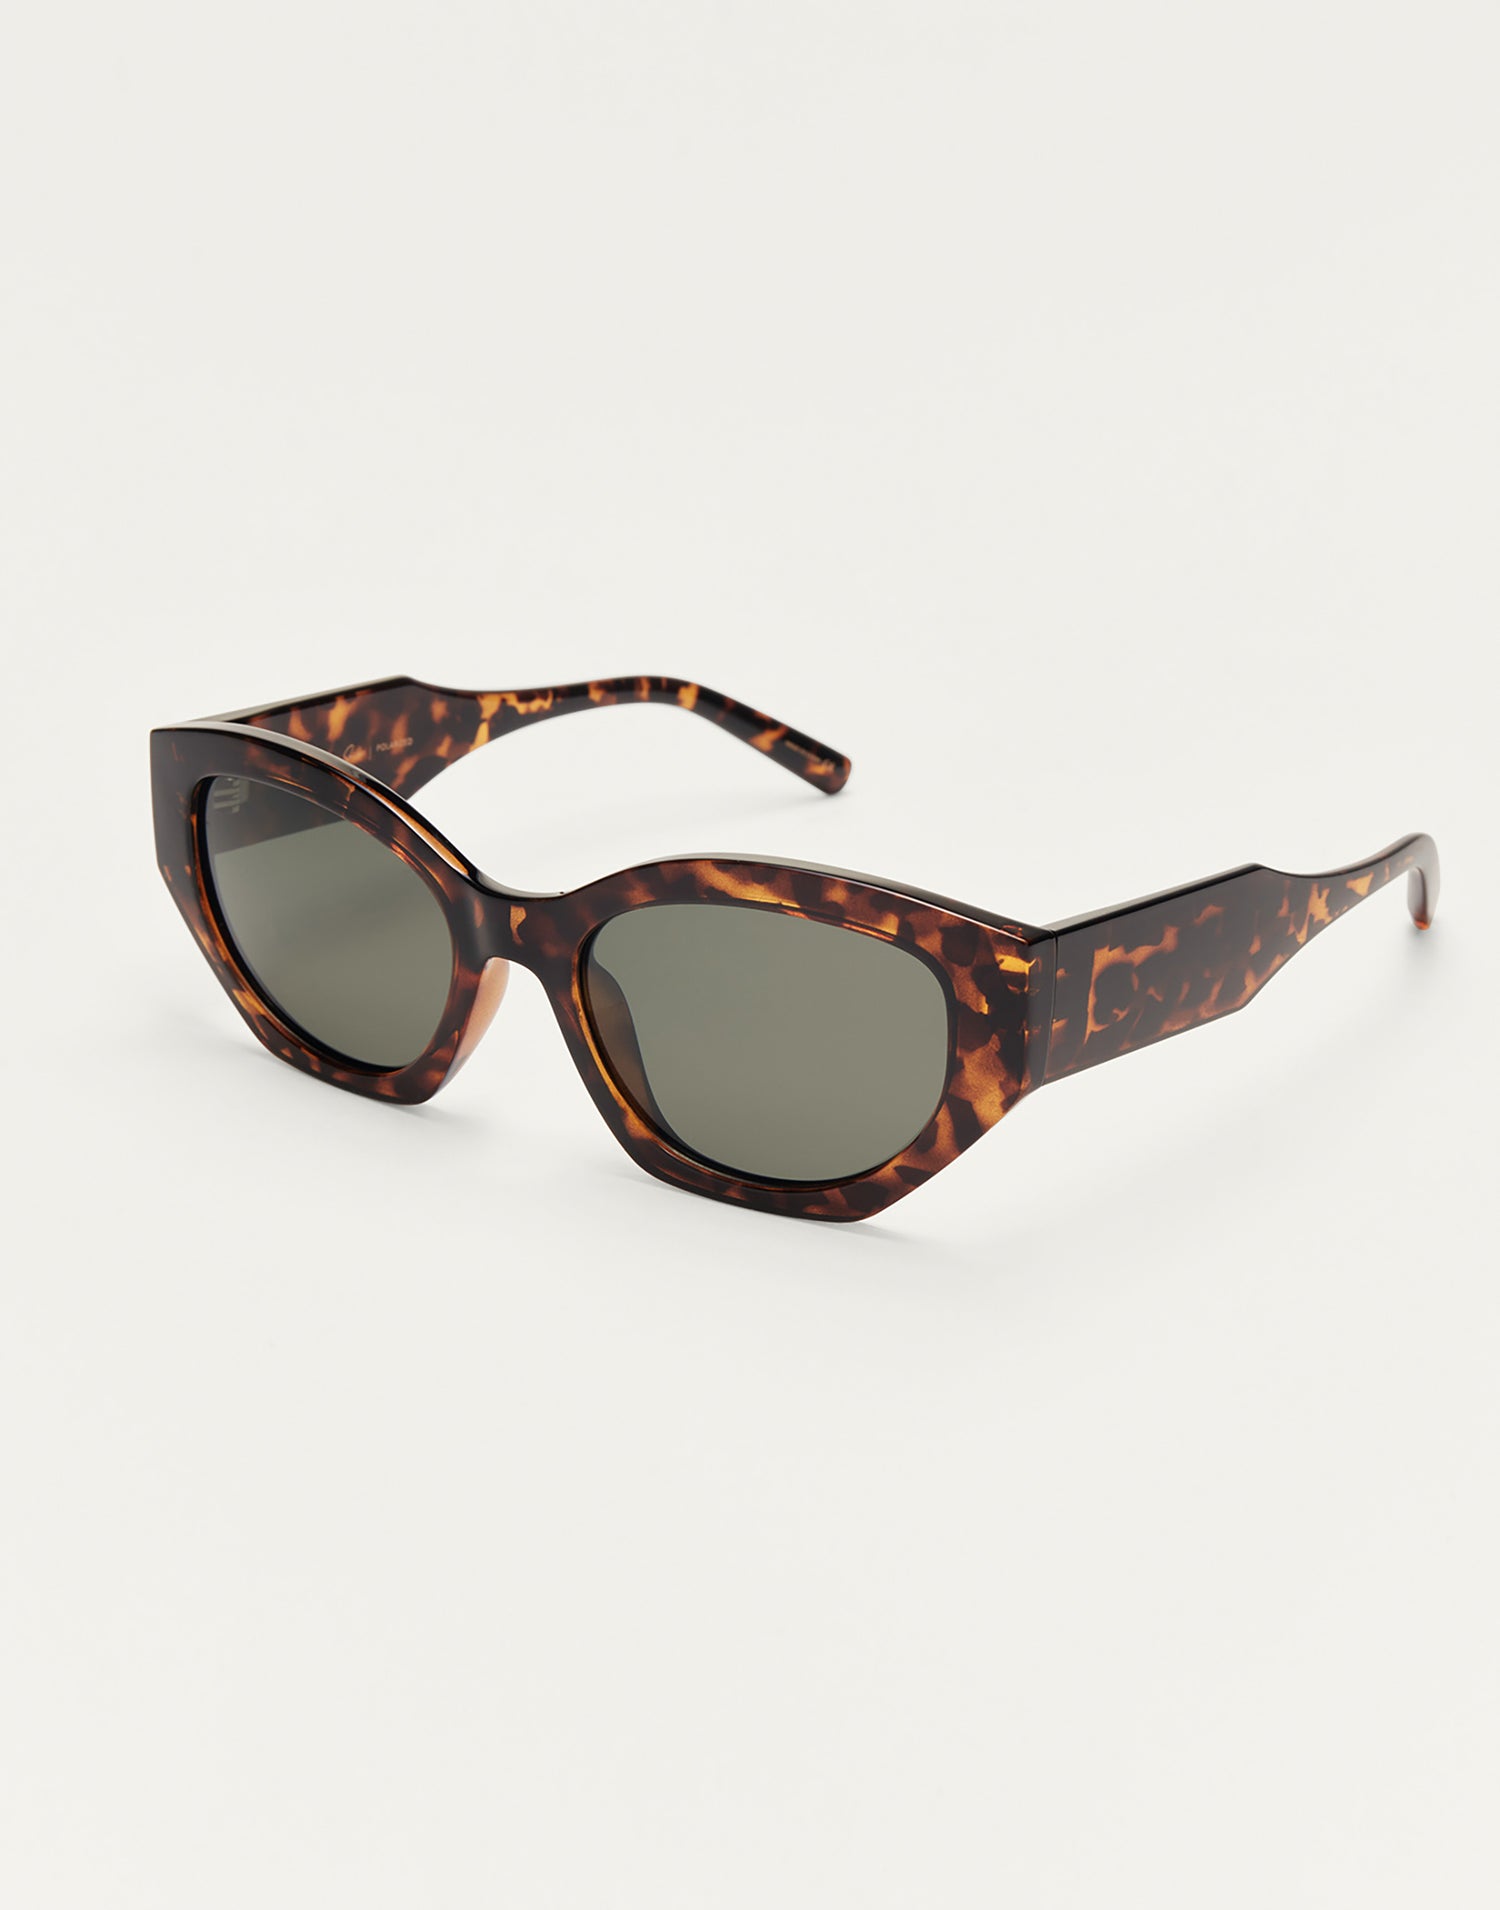 Love Sick Sunglasses by Z Supply in Dark Tort - Angled View